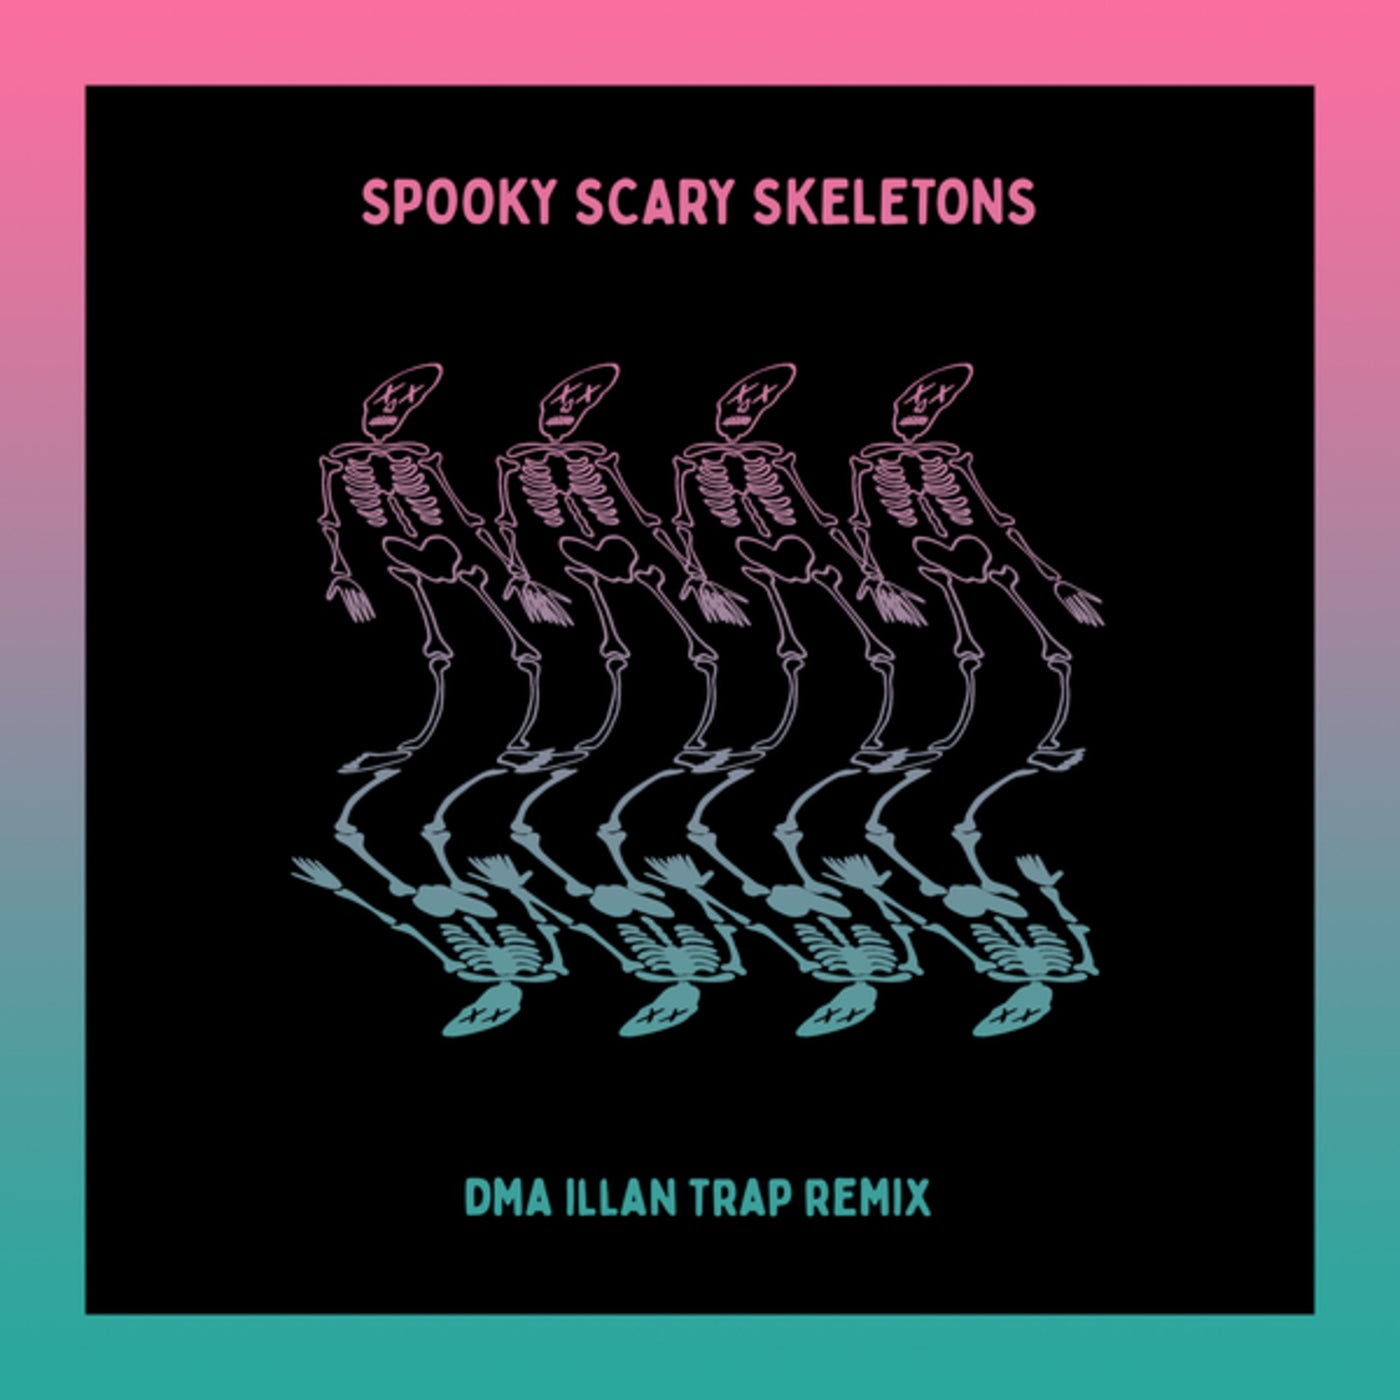 Scary skeletons remix. Spooky, Scary Skeletons Эндрю Голд. Spooky Scary Skeletons DMA illan Trap. Spooky Scary Skeletons Remix. Песня Spooky Scary Skeletons.